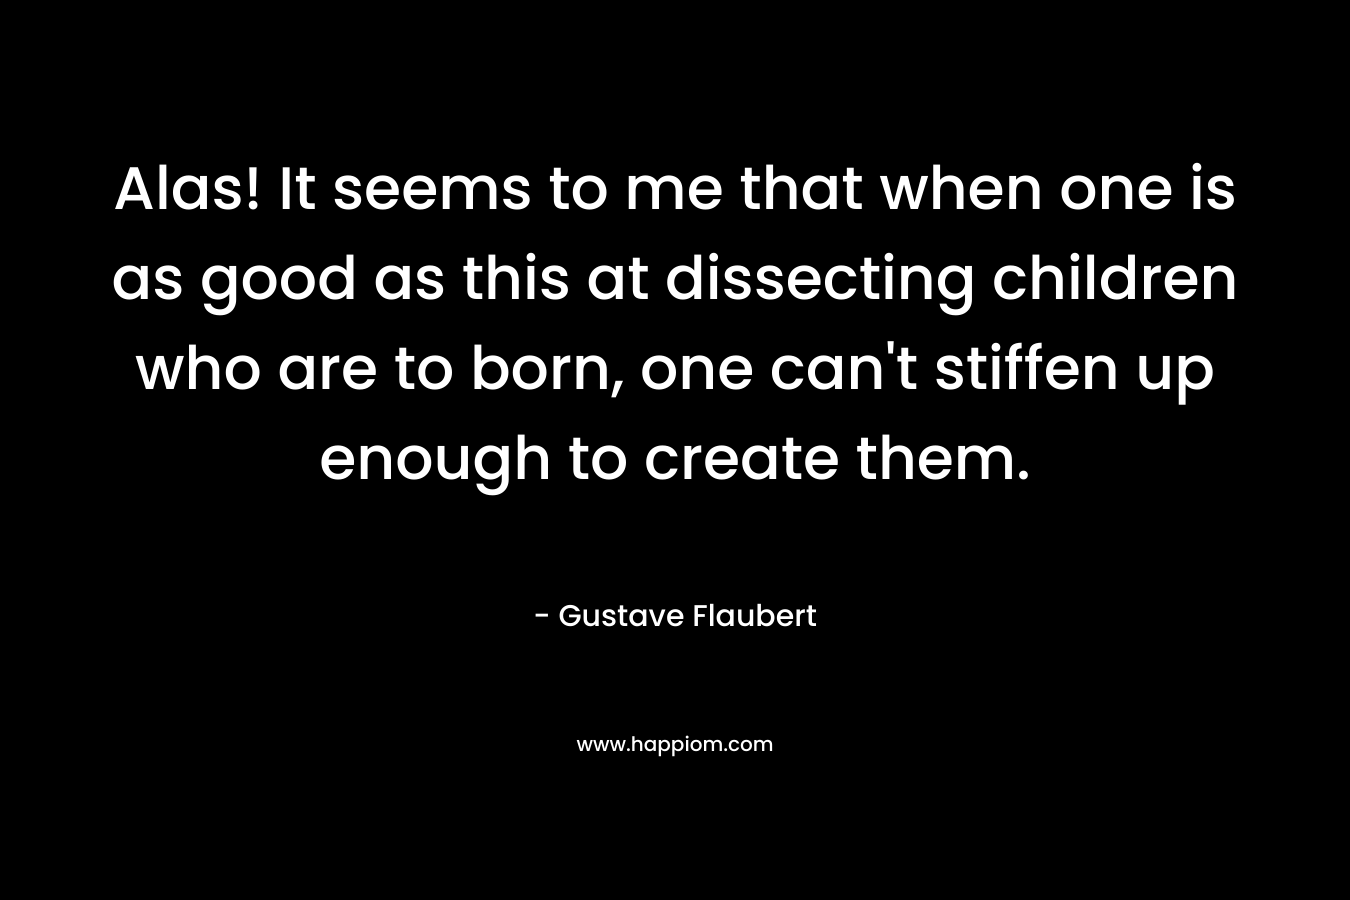 Alas! It seems to me that when one is as good as this at dissecting children who are to born, one can’t stiffen up enough to create them. – Gustave Flaubert